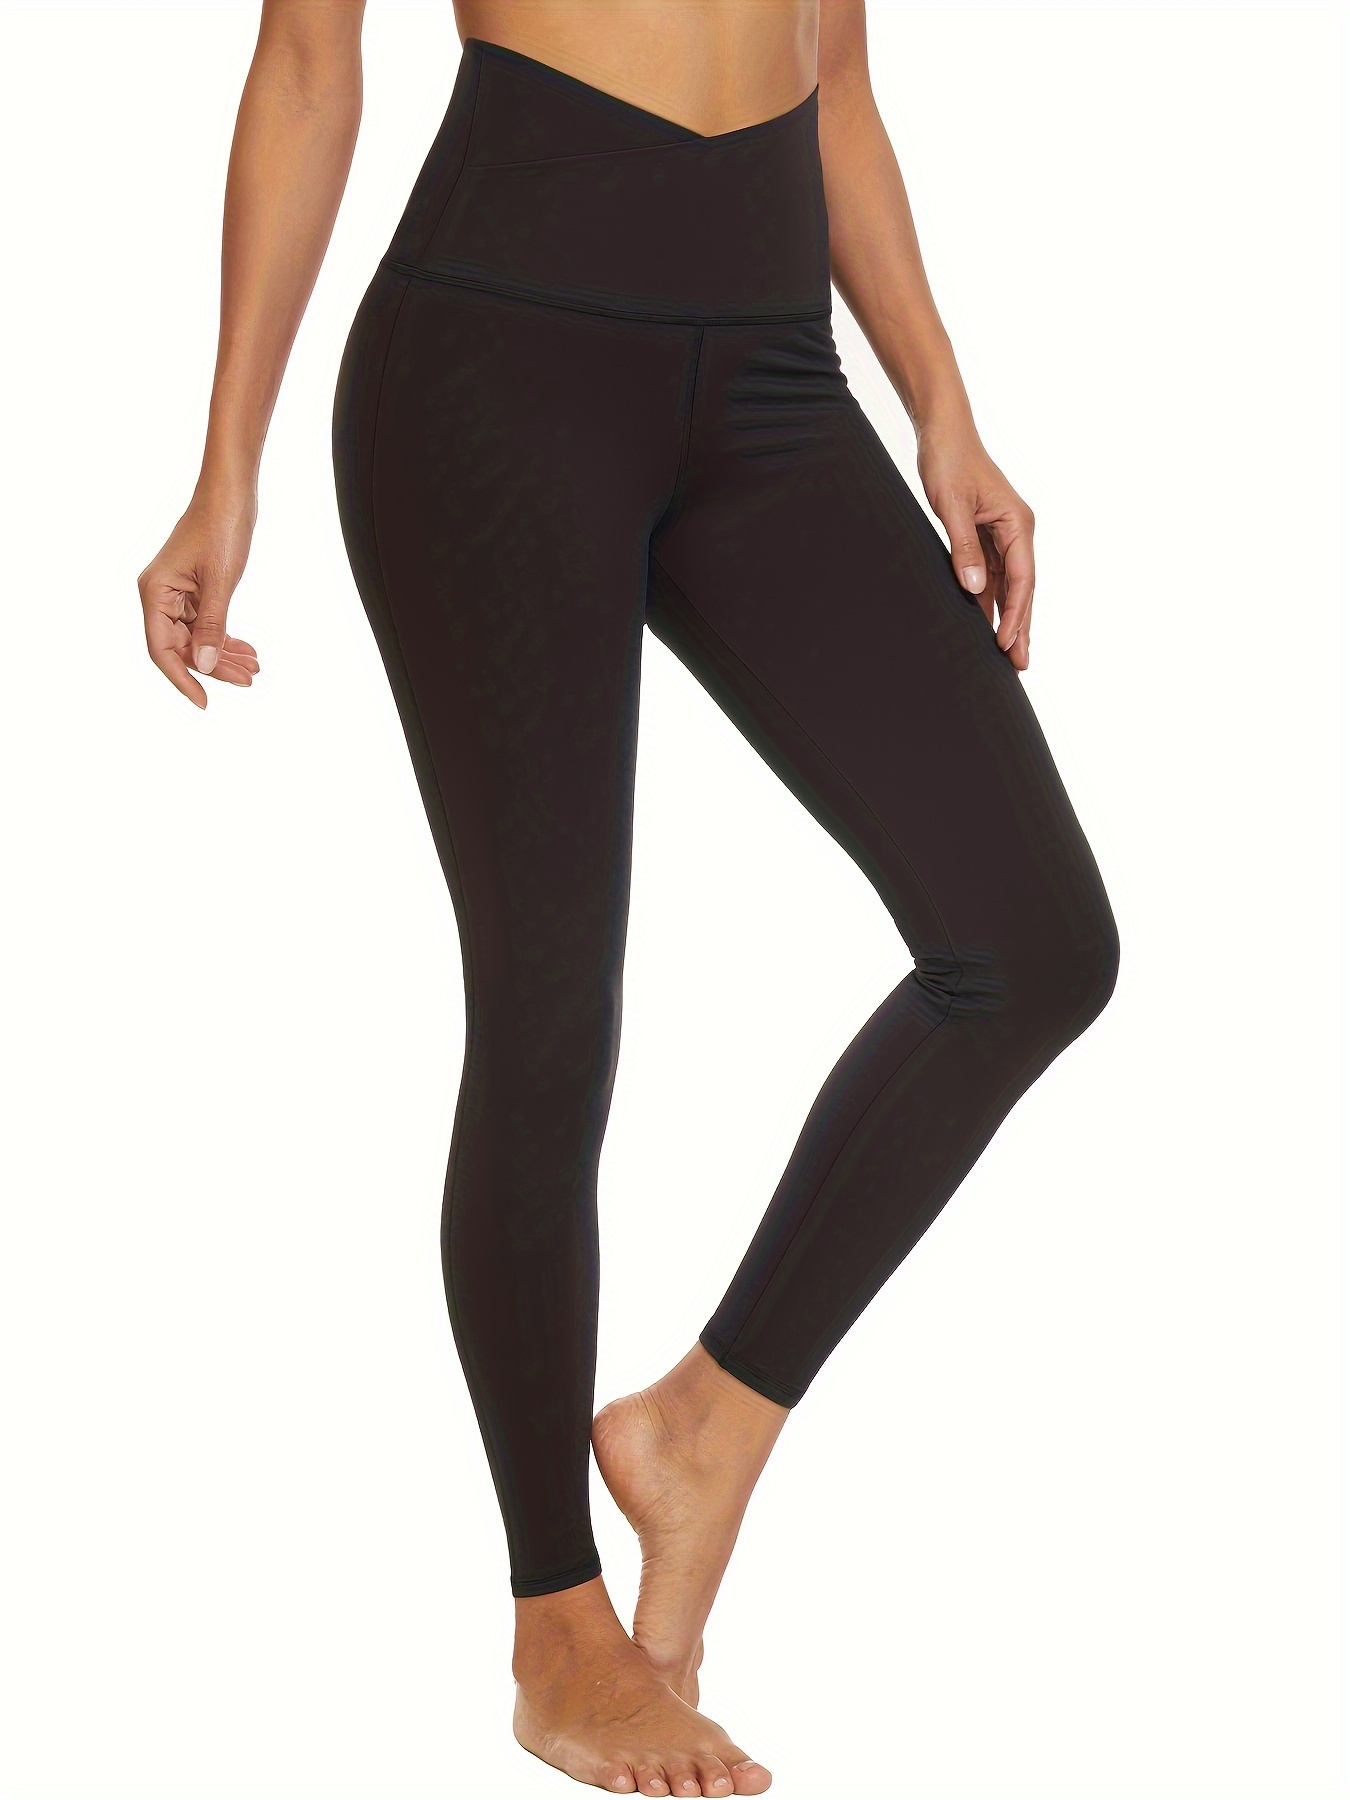 Girls V Cross Waisted Yoga Pants UPF 50+ Buttery Soft Leggings with Pockets  Youth Althletic Dance Running Tight Joggers 8+